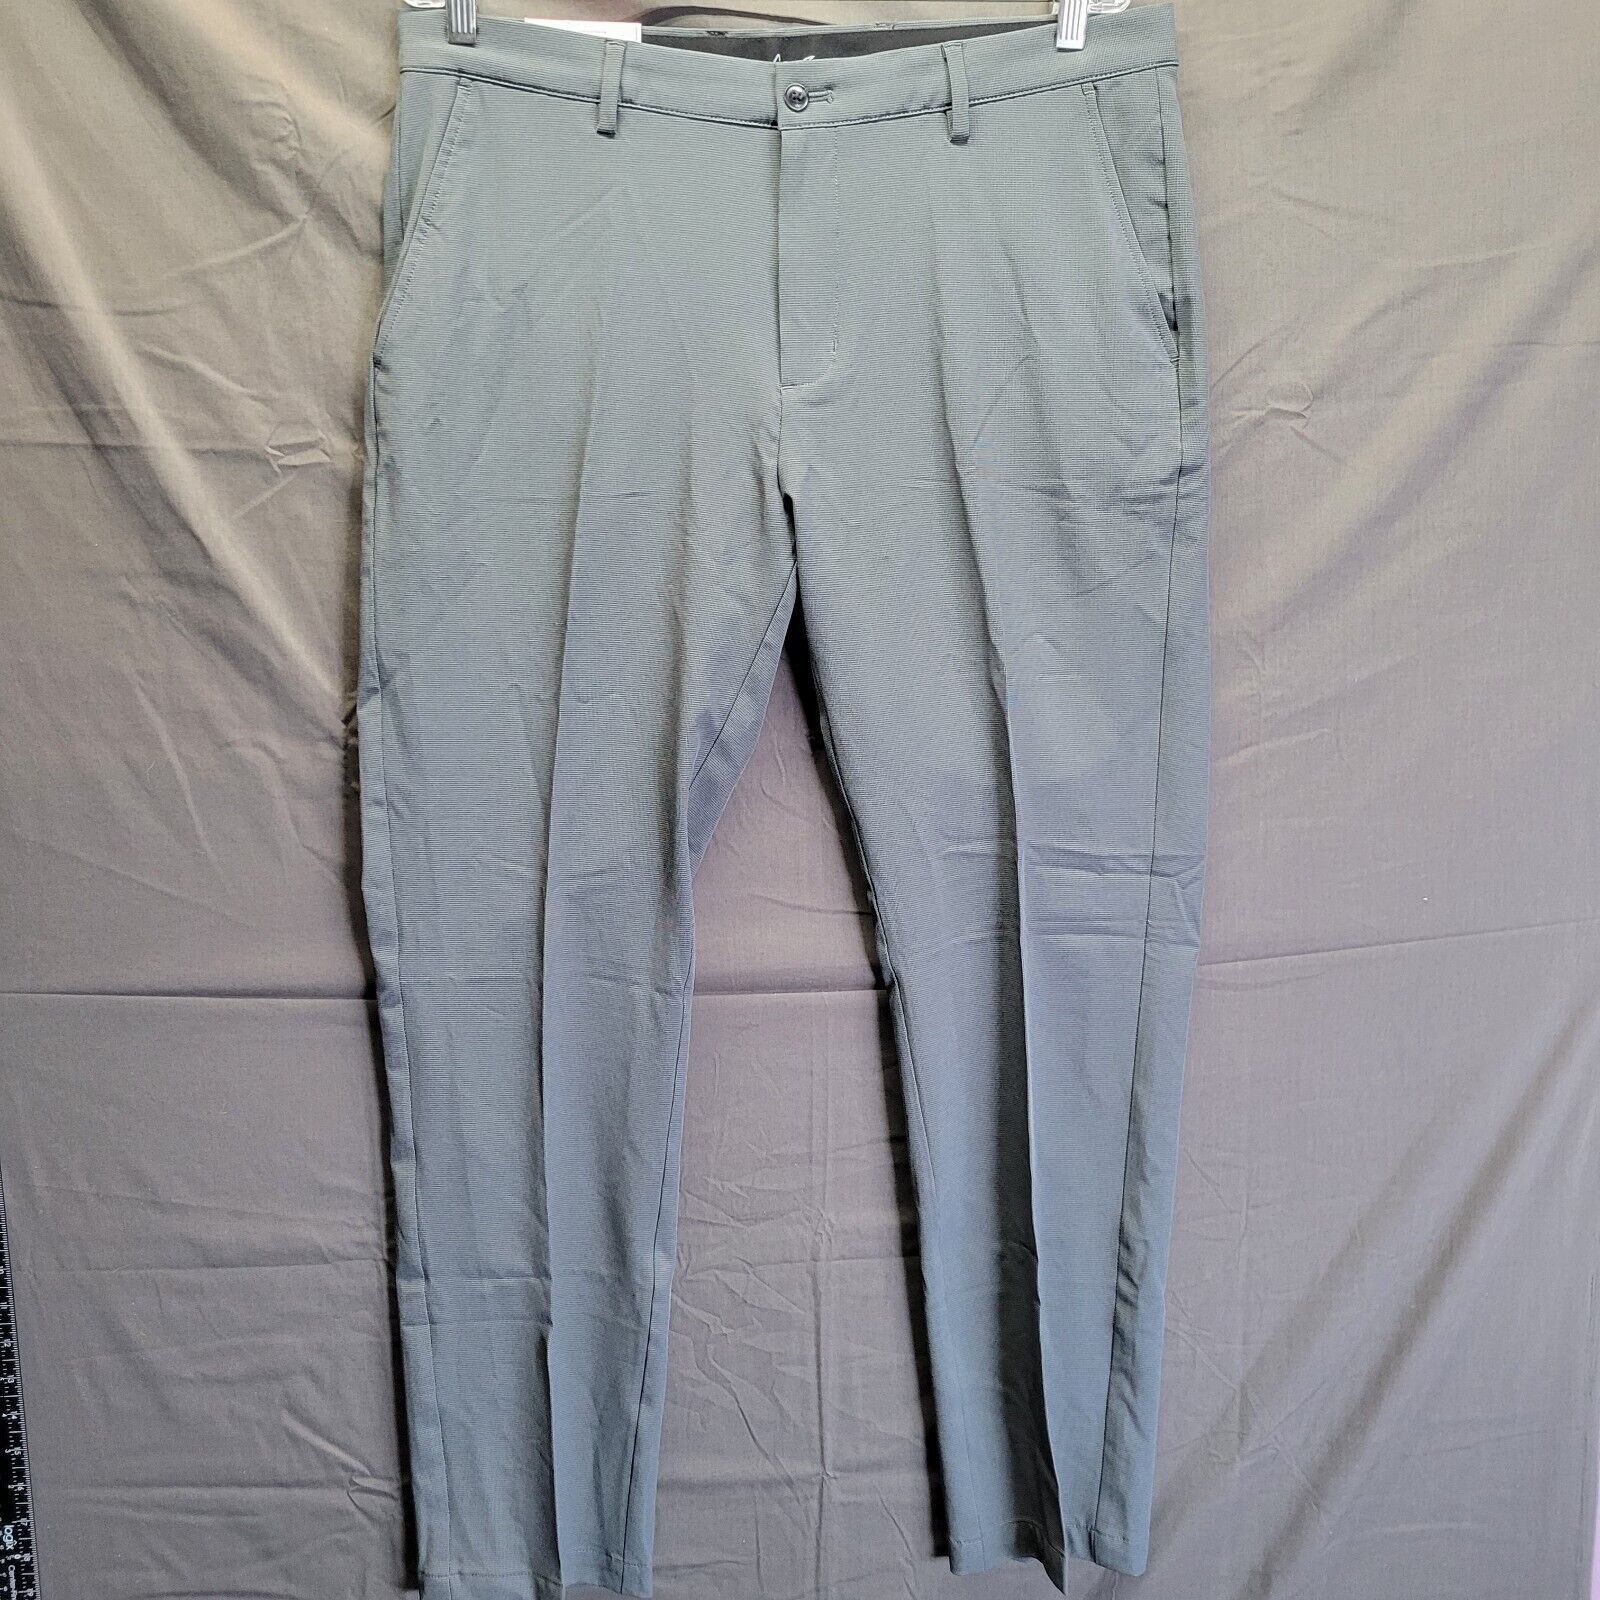 Primary image for Greg Norman Mens Ultimate Travel Comfort Pants (CHARCOAL GRAY, 34WX30L) NWT